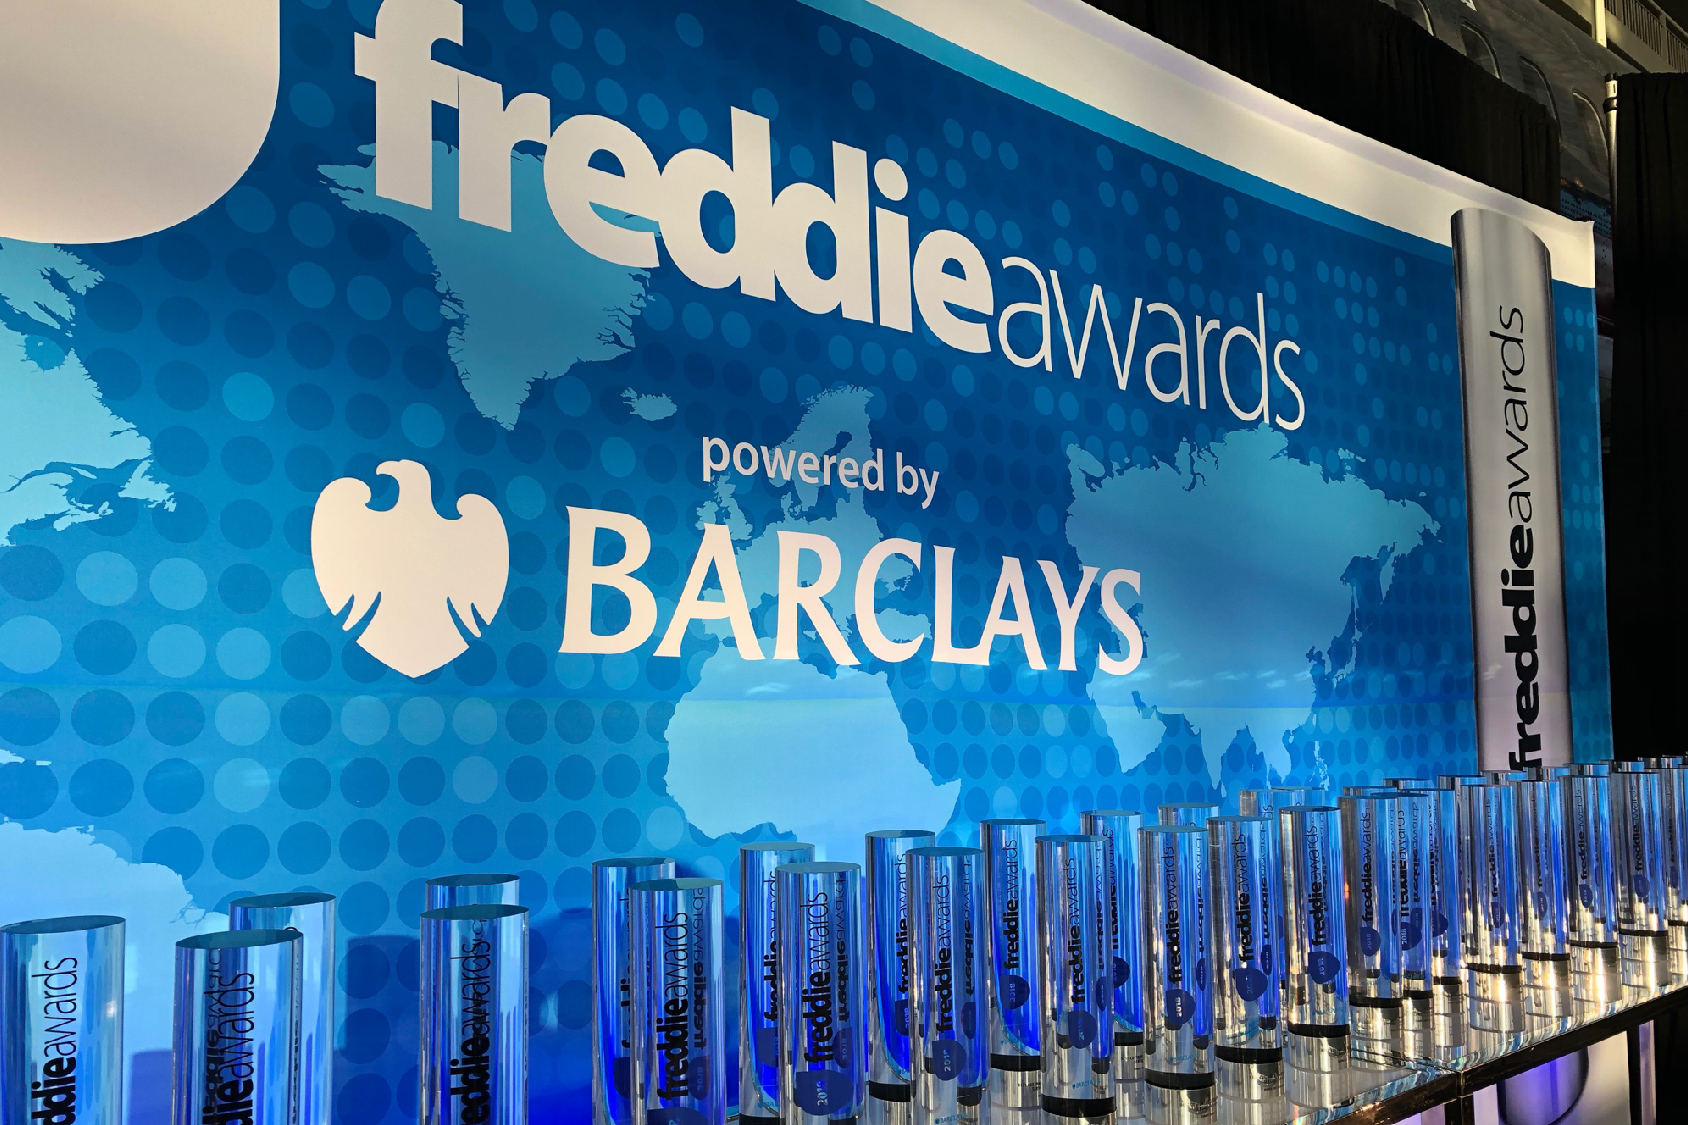 Custom trophies at the annual Freddie Awards